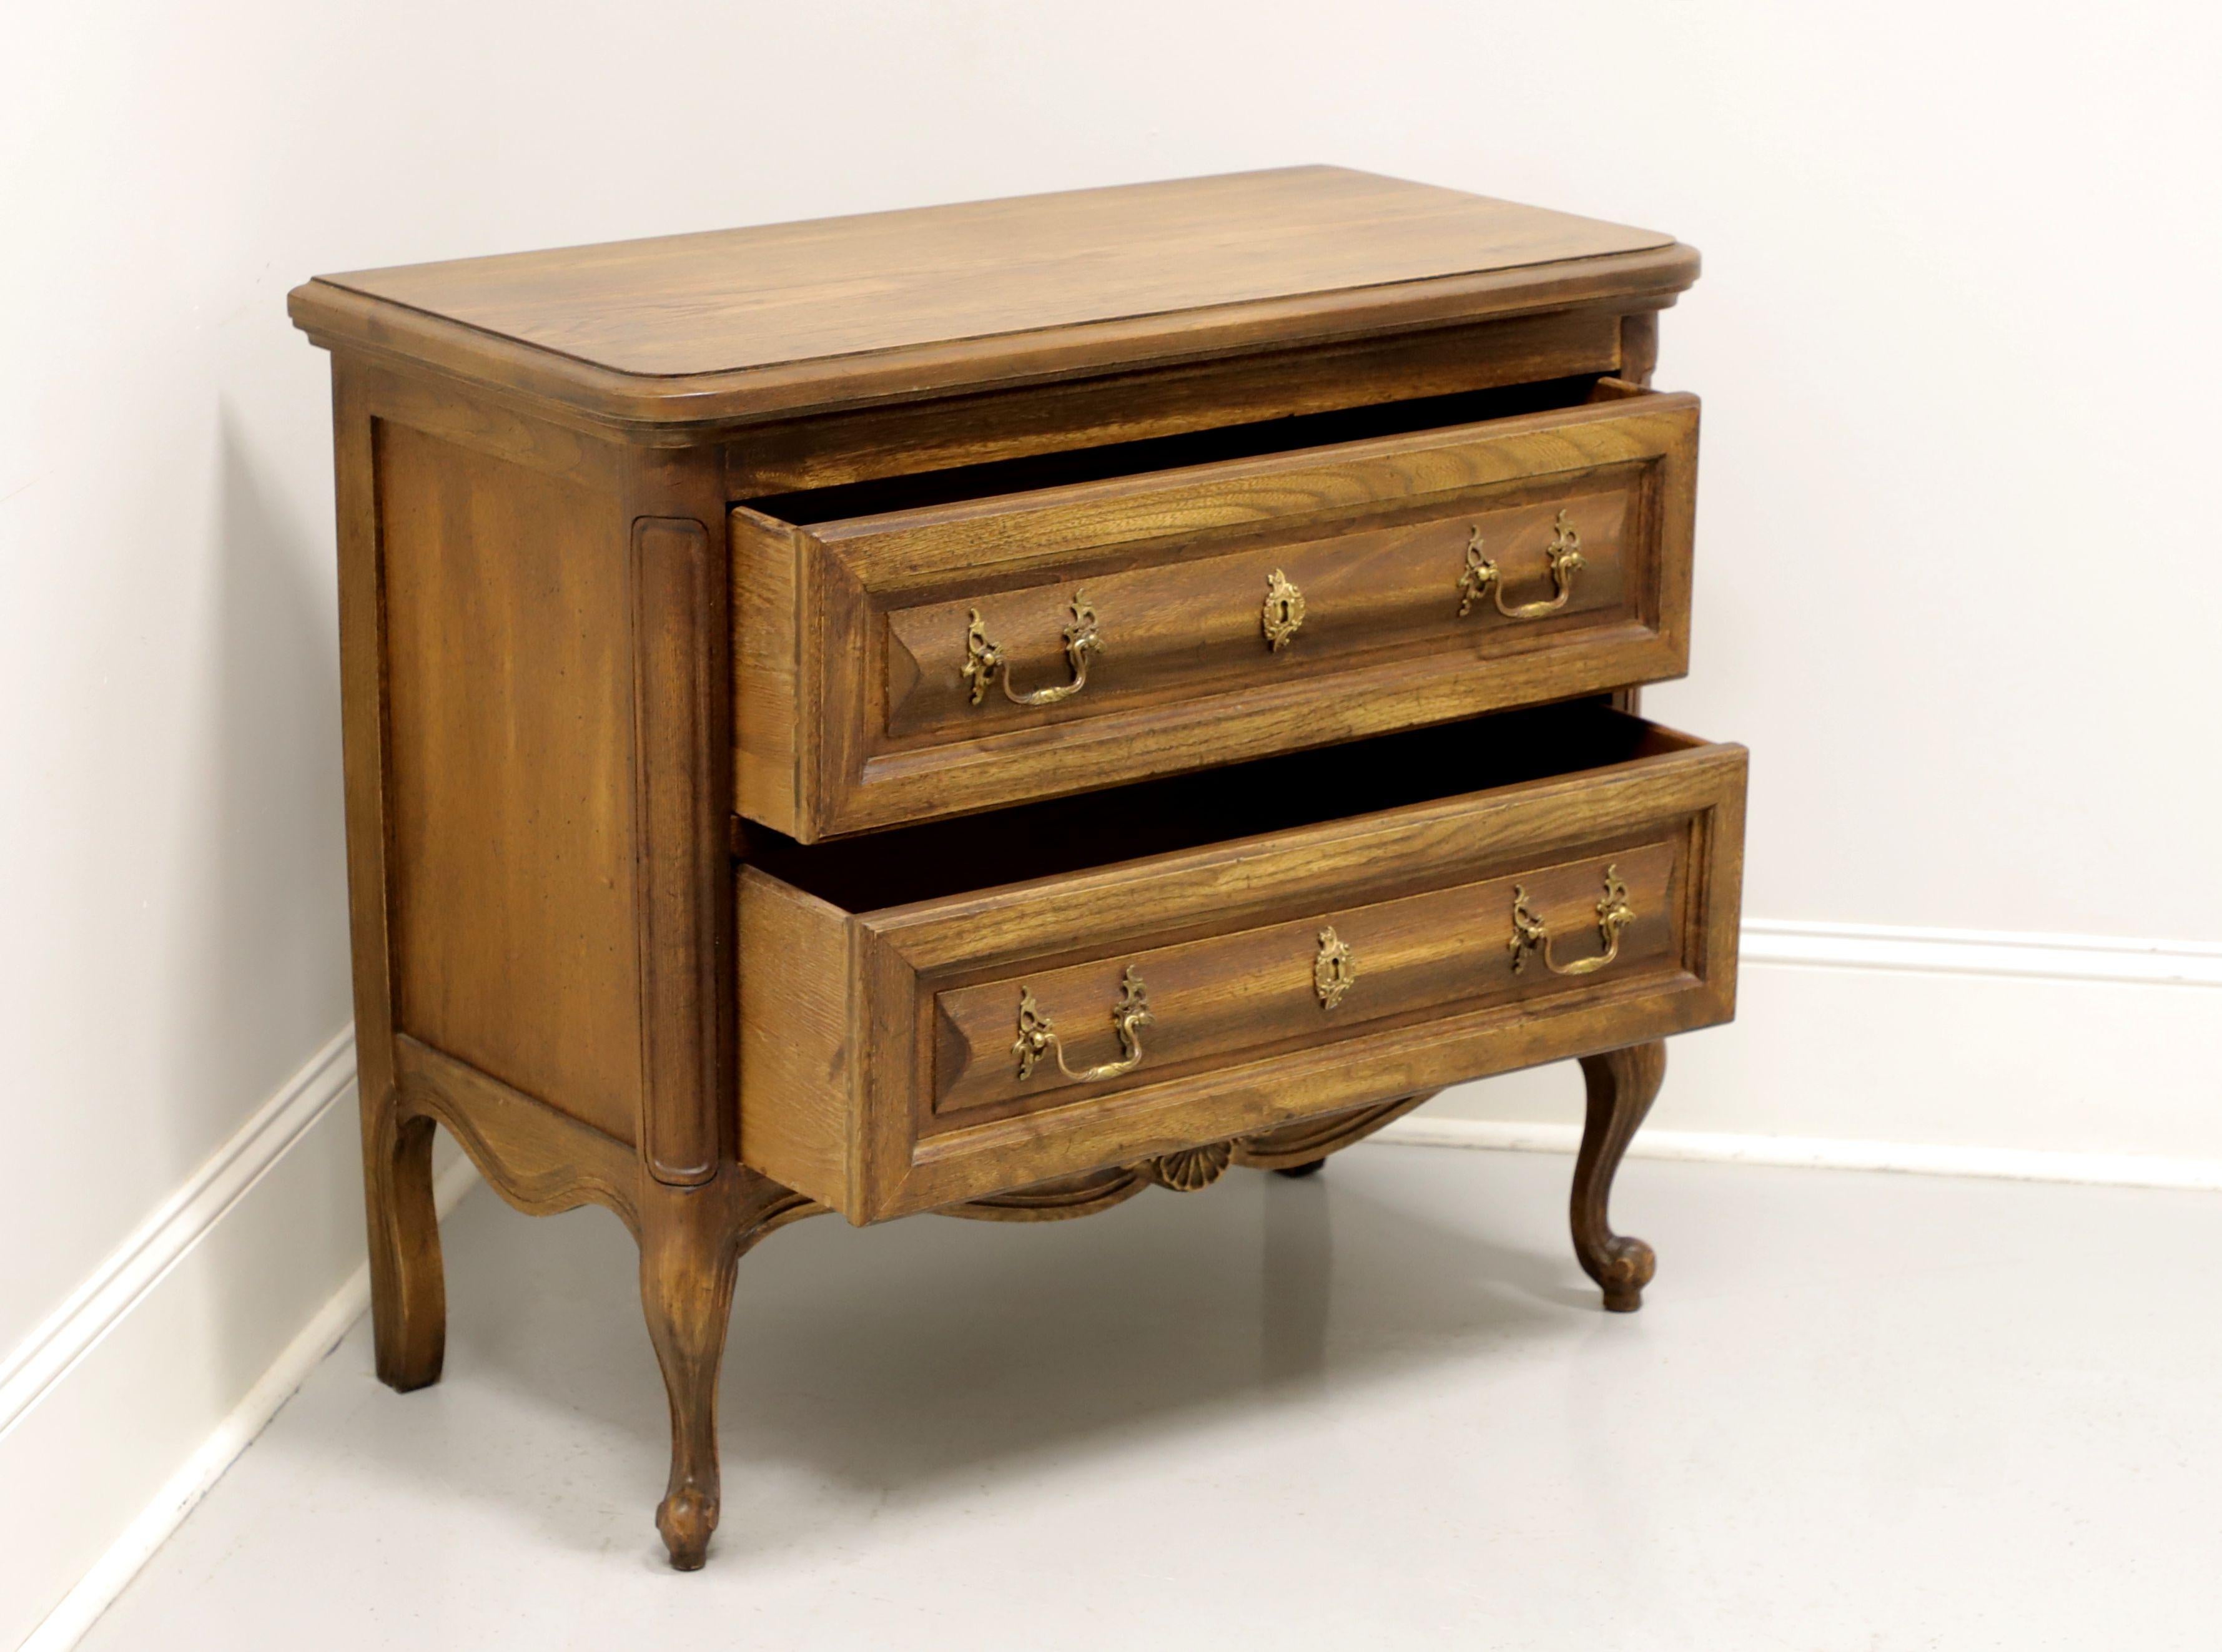 Mid 20th Century Oak French Country Style Two-Drawer Occasional Chest In Good Condition For Sale In Charlotte, NC